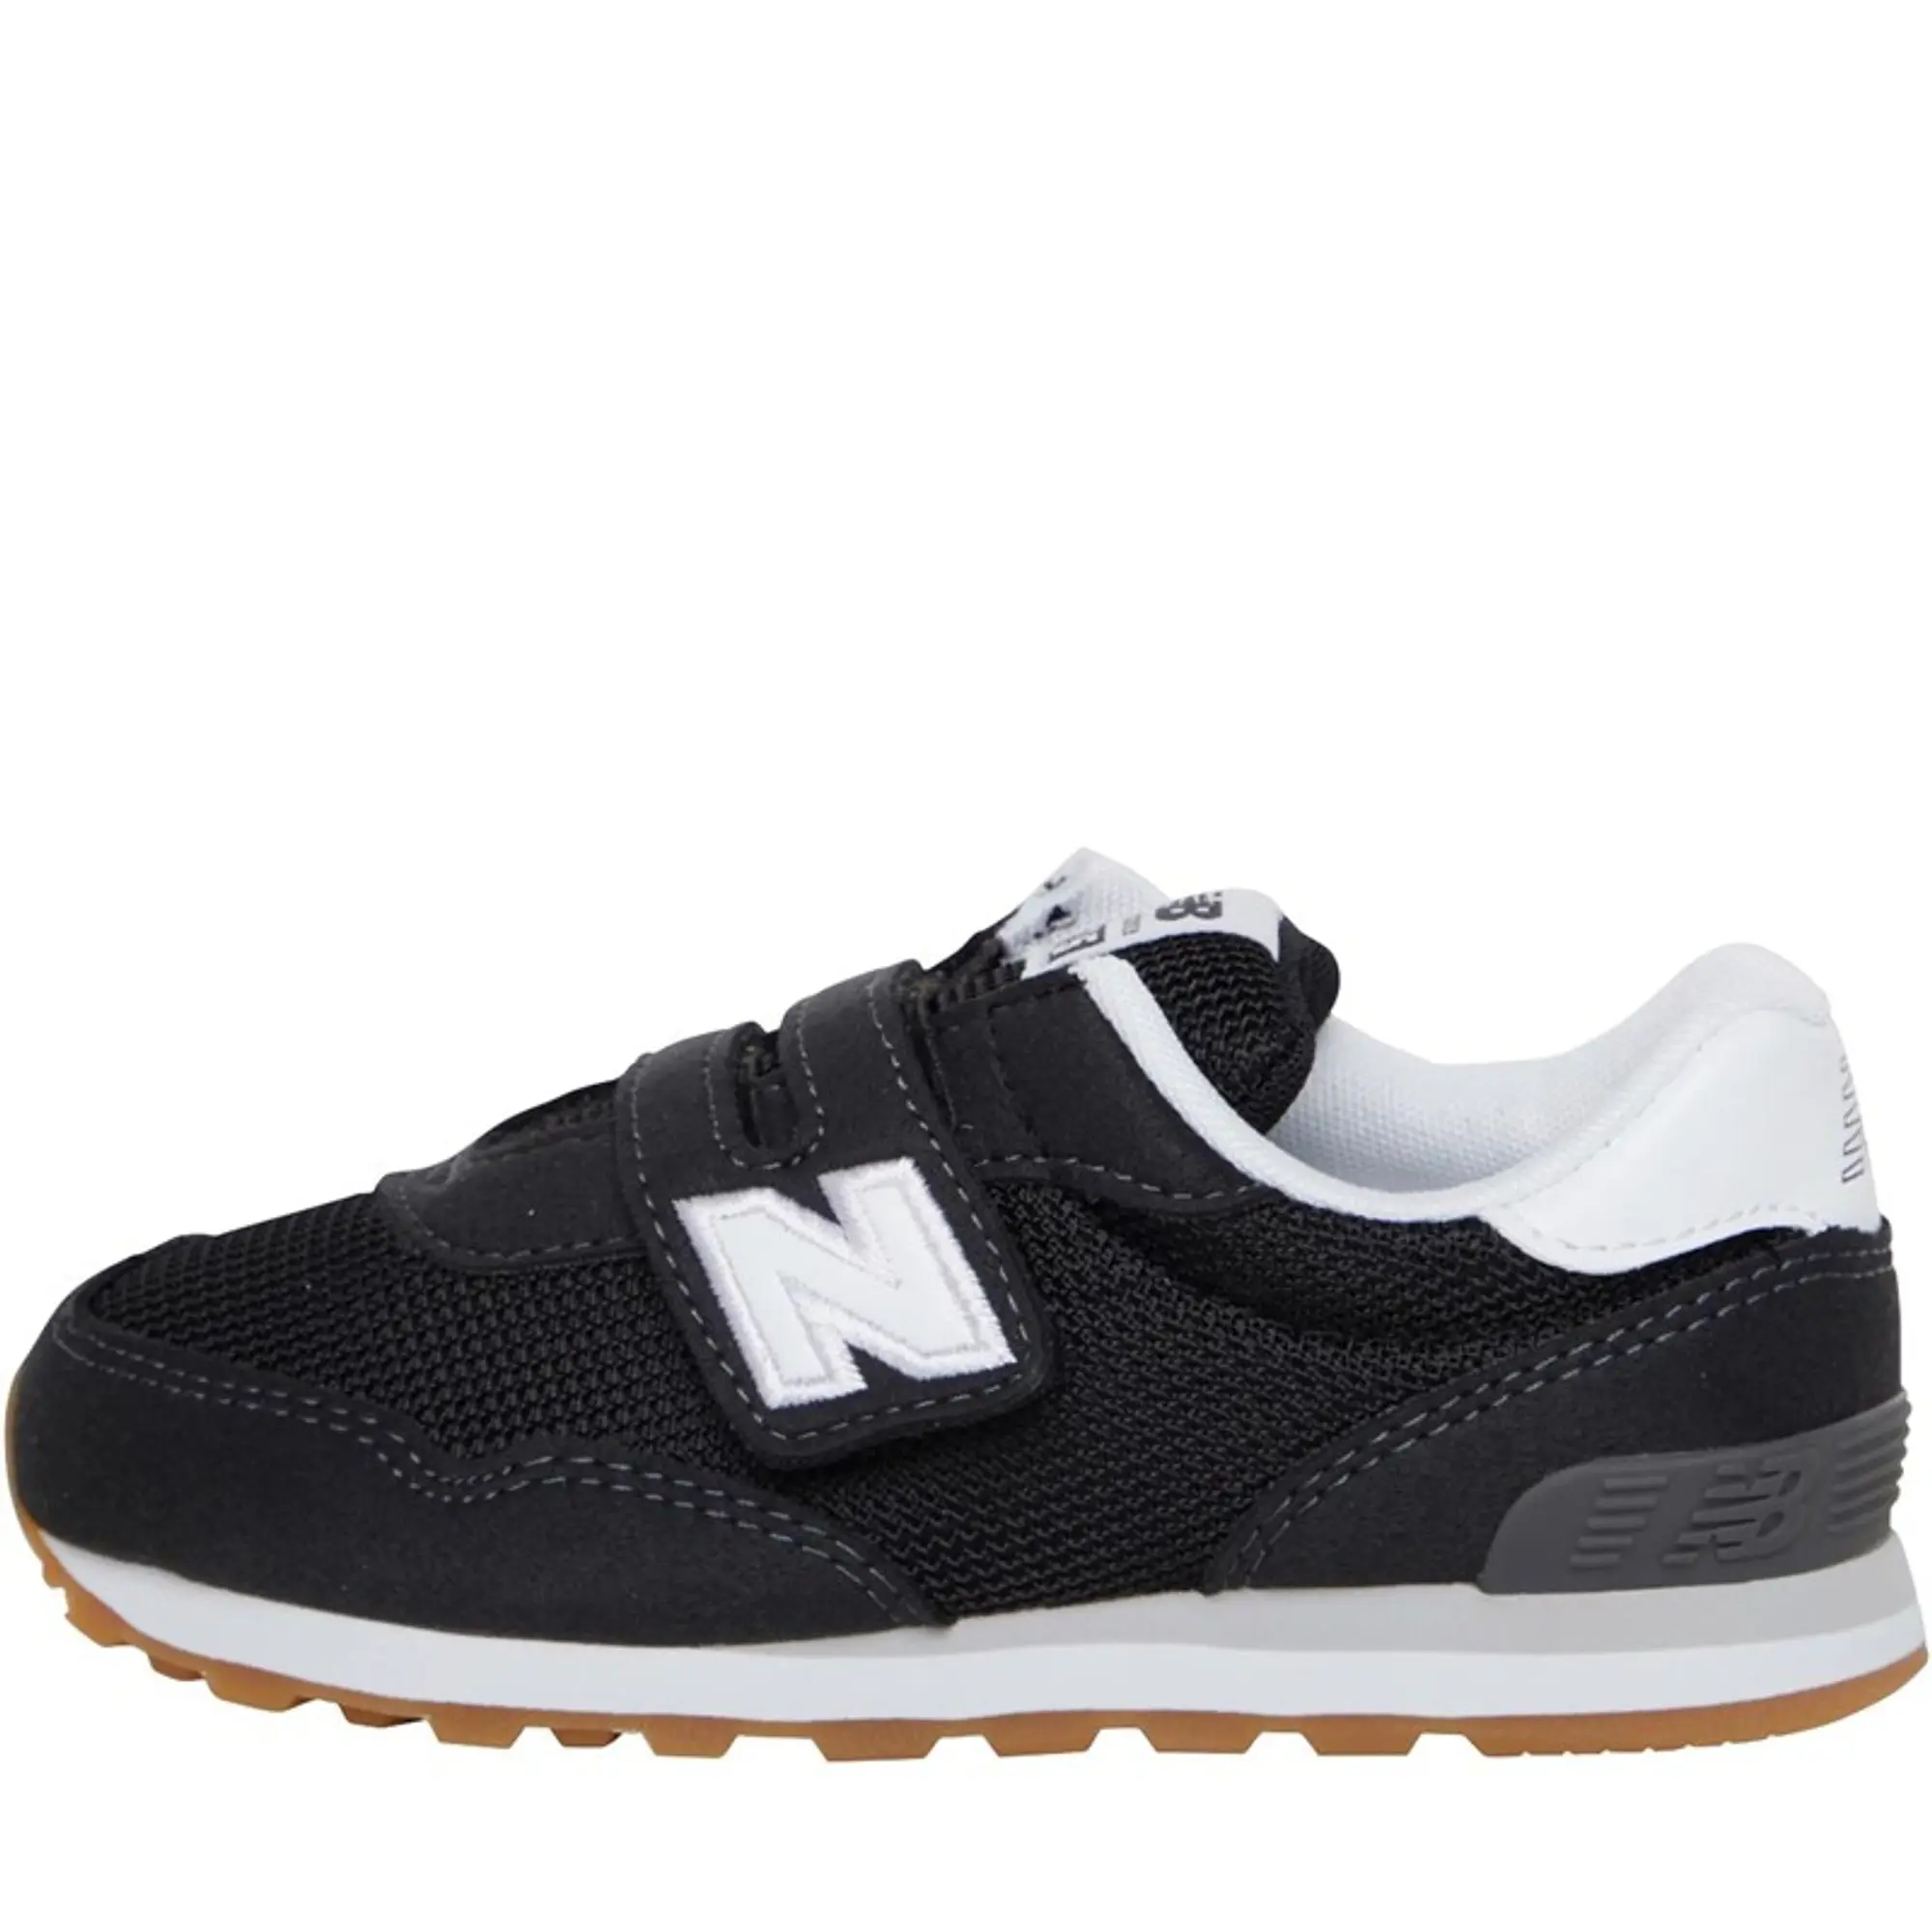 New Balance Infants' 515 Classic in Black/White Synthetic